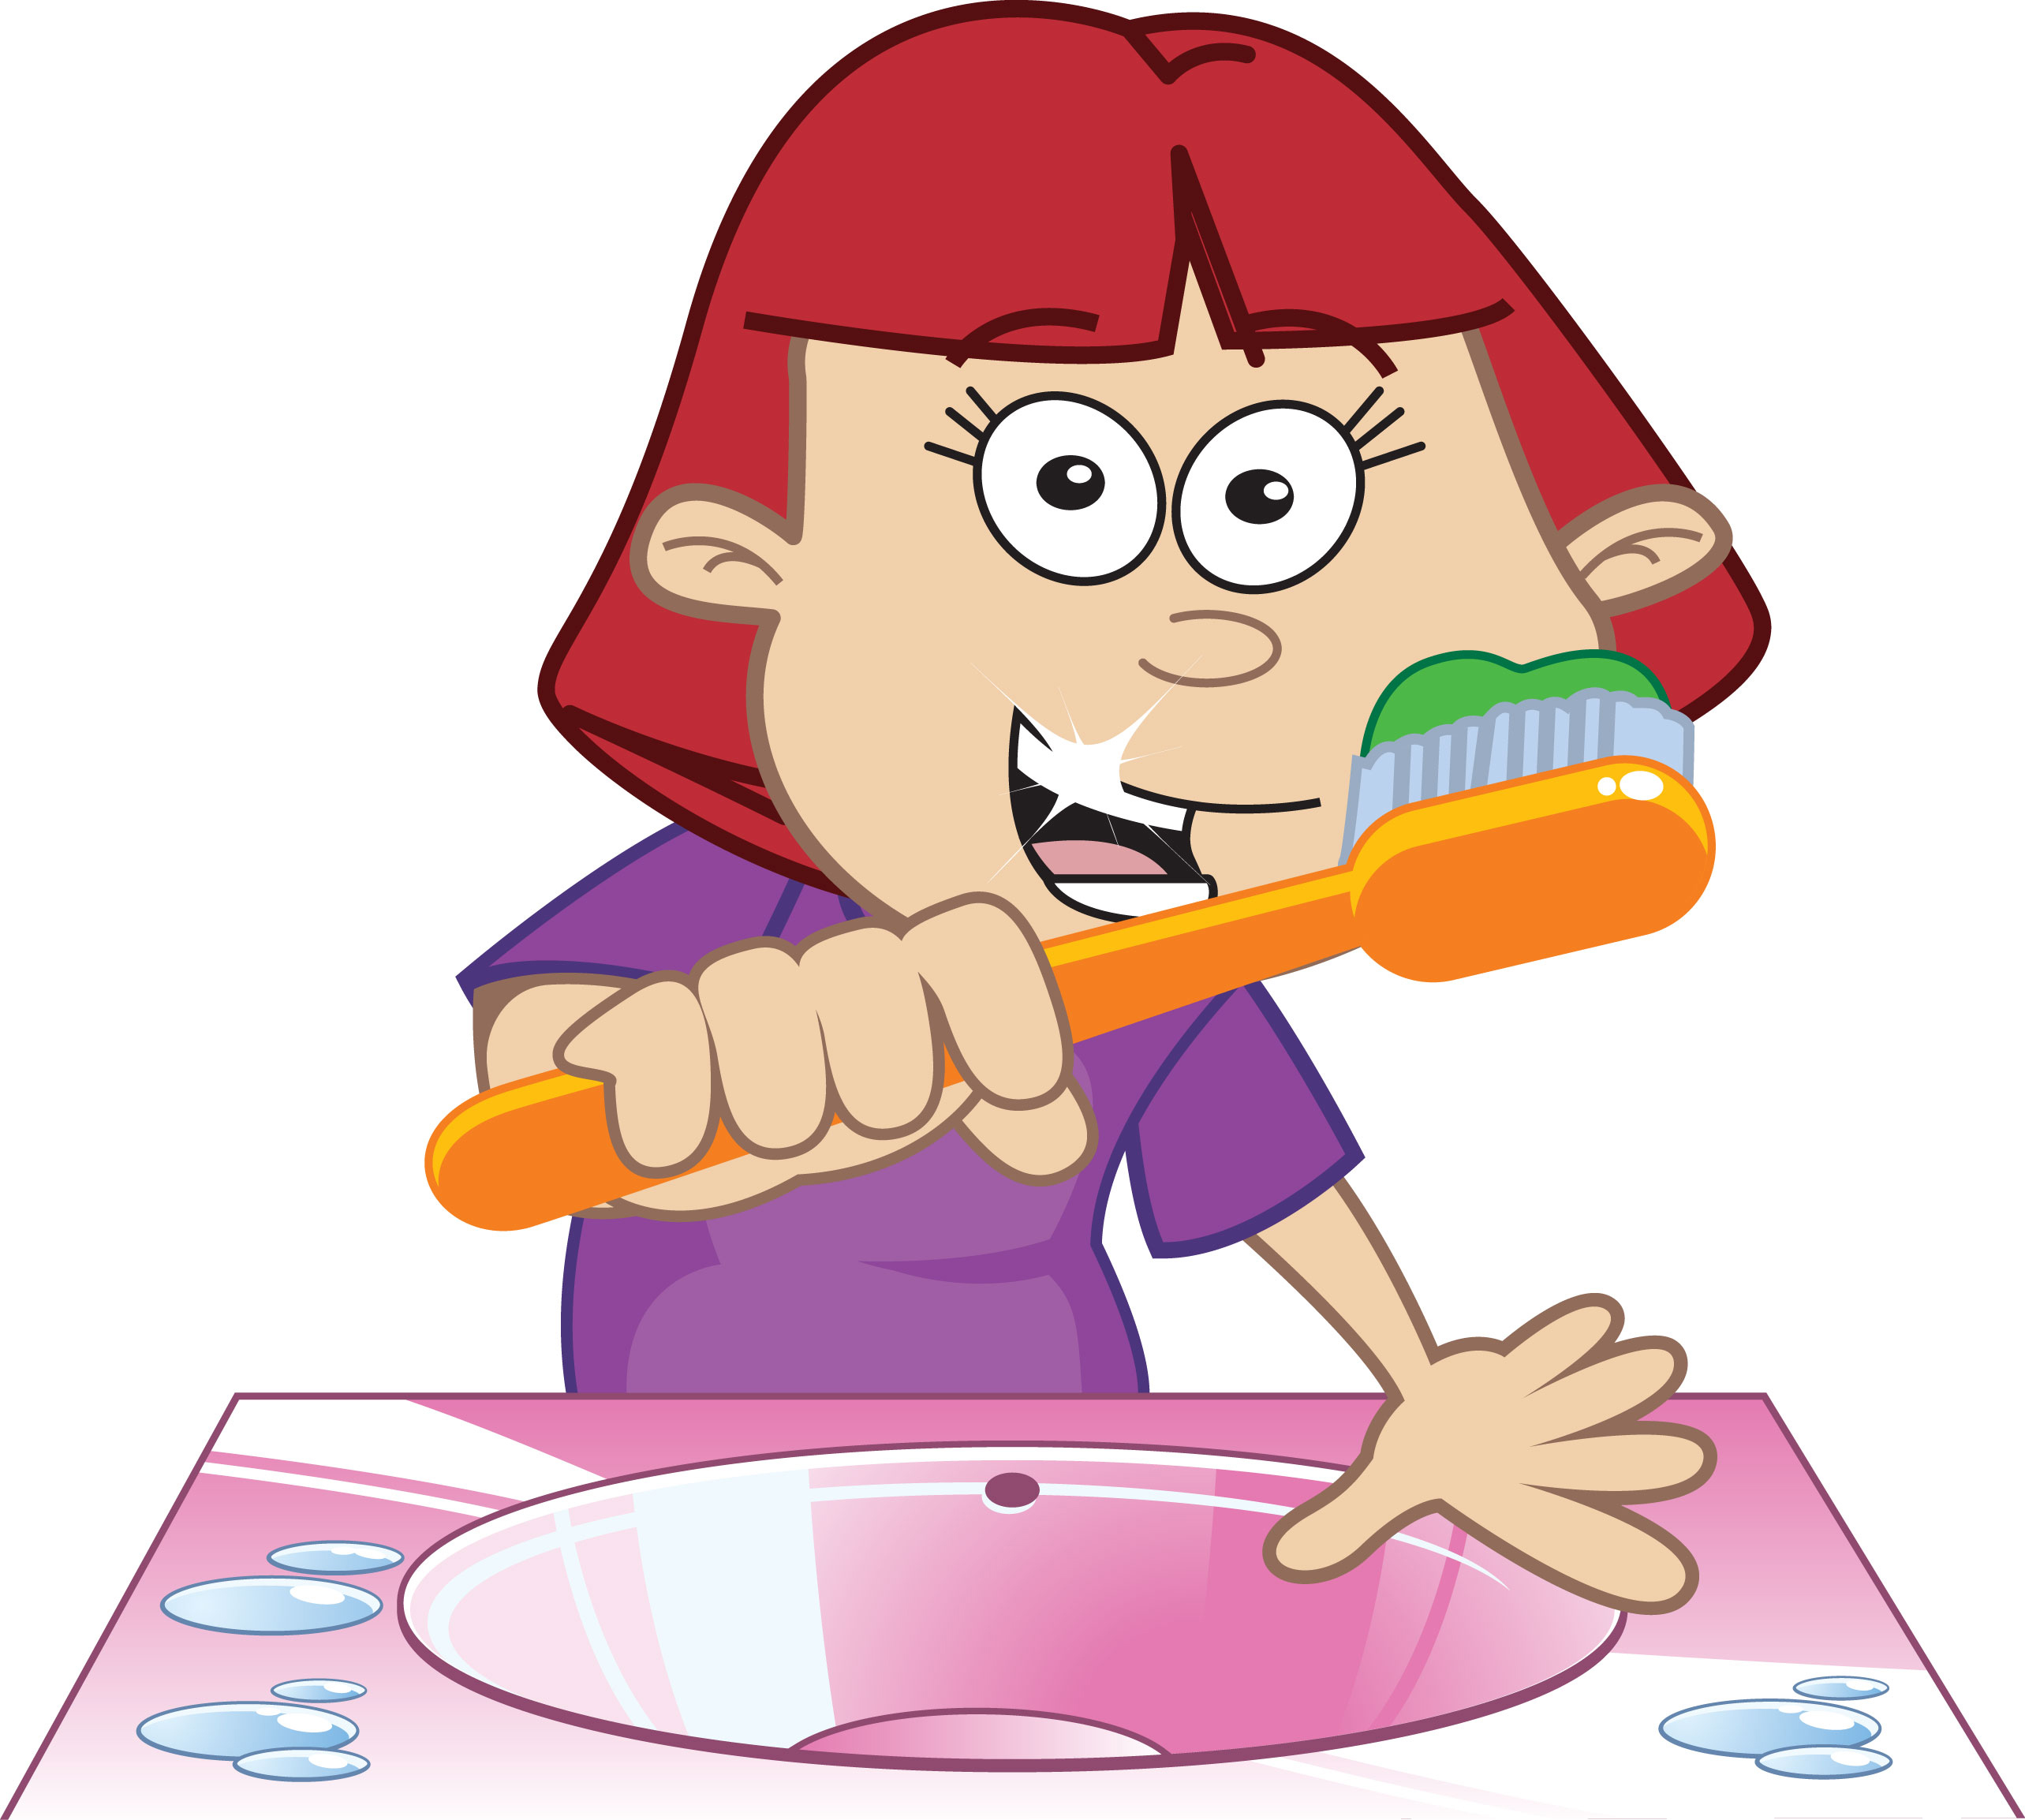 Image Of Brushing Teeth - Cliparts.co